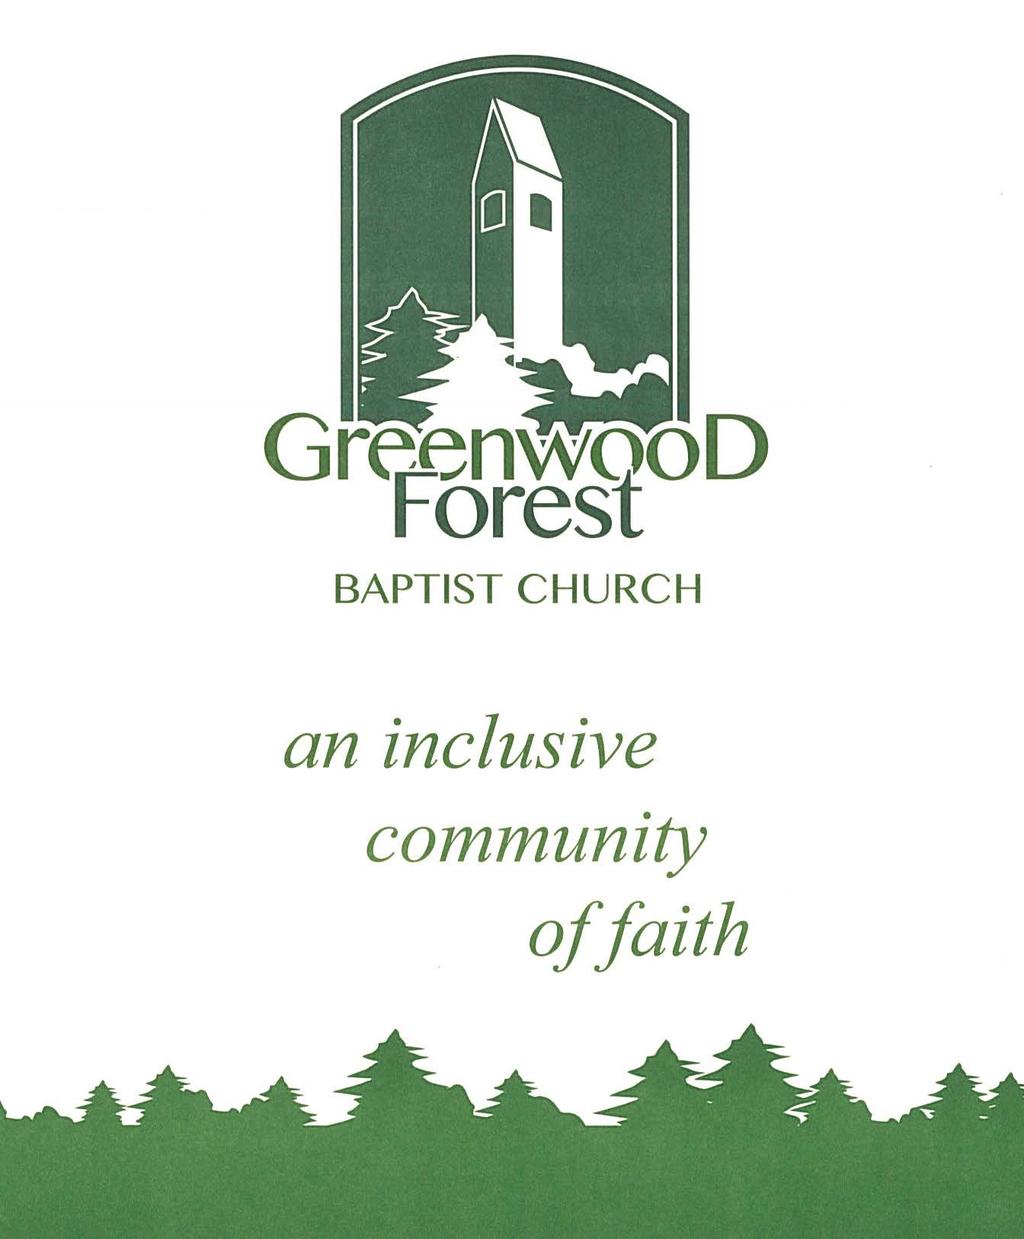 GREENWOOD FOREST BAPTIST CHURCH The Worship of God The Twenty-Third Sunday After Pentecost November 12, 2017 Chiming of the Hour Gathering Hymn 295 Welcome to Worship Leader: The Lord be with you,